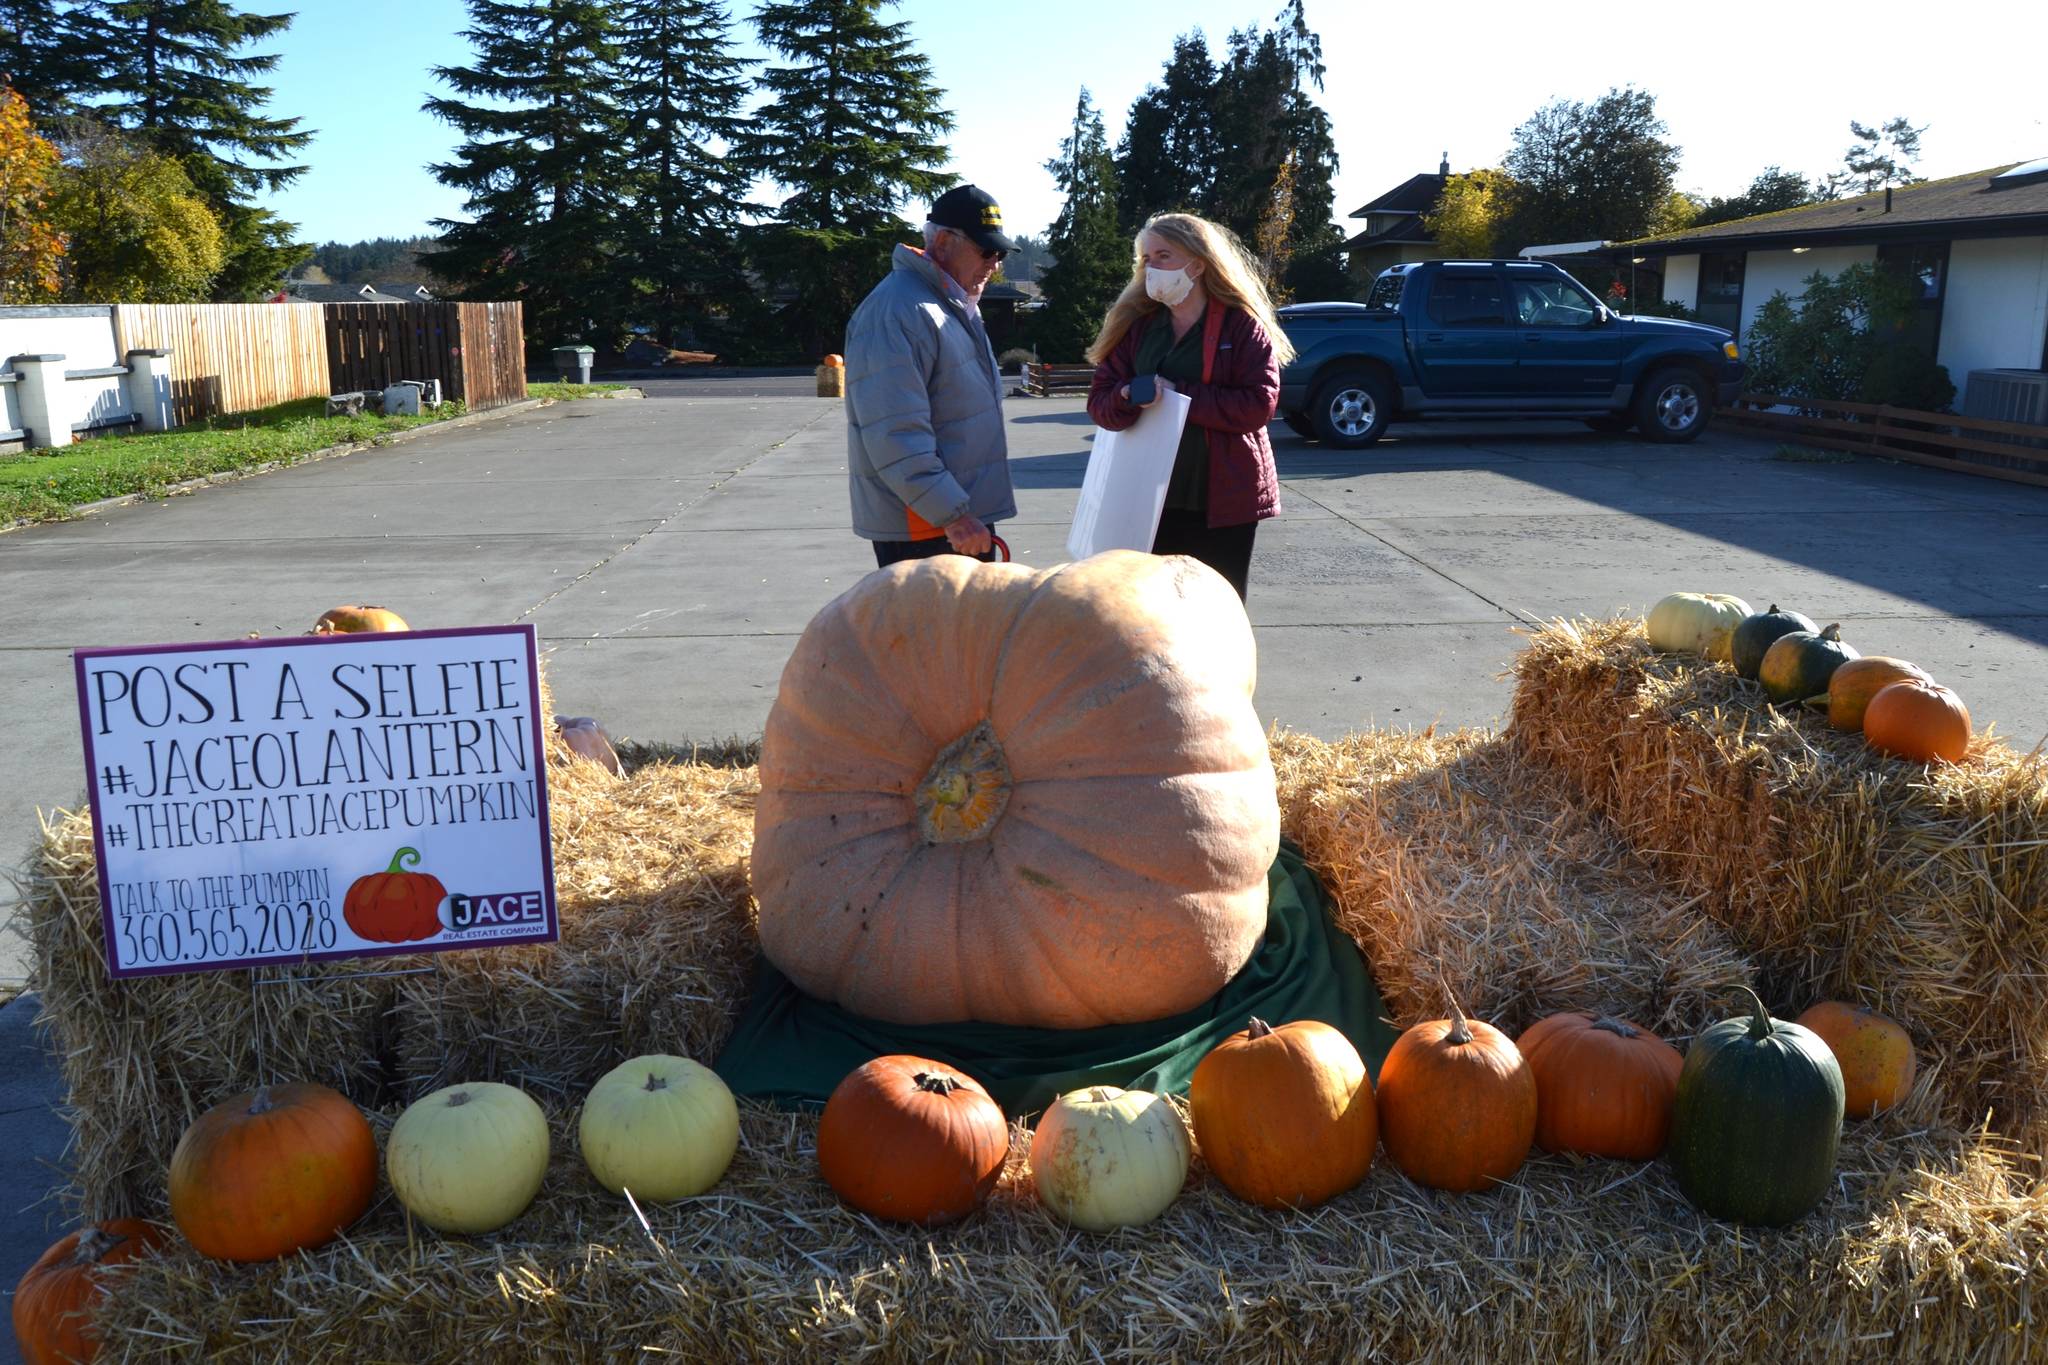 Through Veterans Day, visitors can see Ross Osborn’s Dill’s Atlantic Giant pumpkin at JACE Real Estate Company off Sequim Avenue. Here, Osborn chats with Eileen Schmitz, principal broker at JACE. (Matthew Nash/Olympic Peninsula News Group)